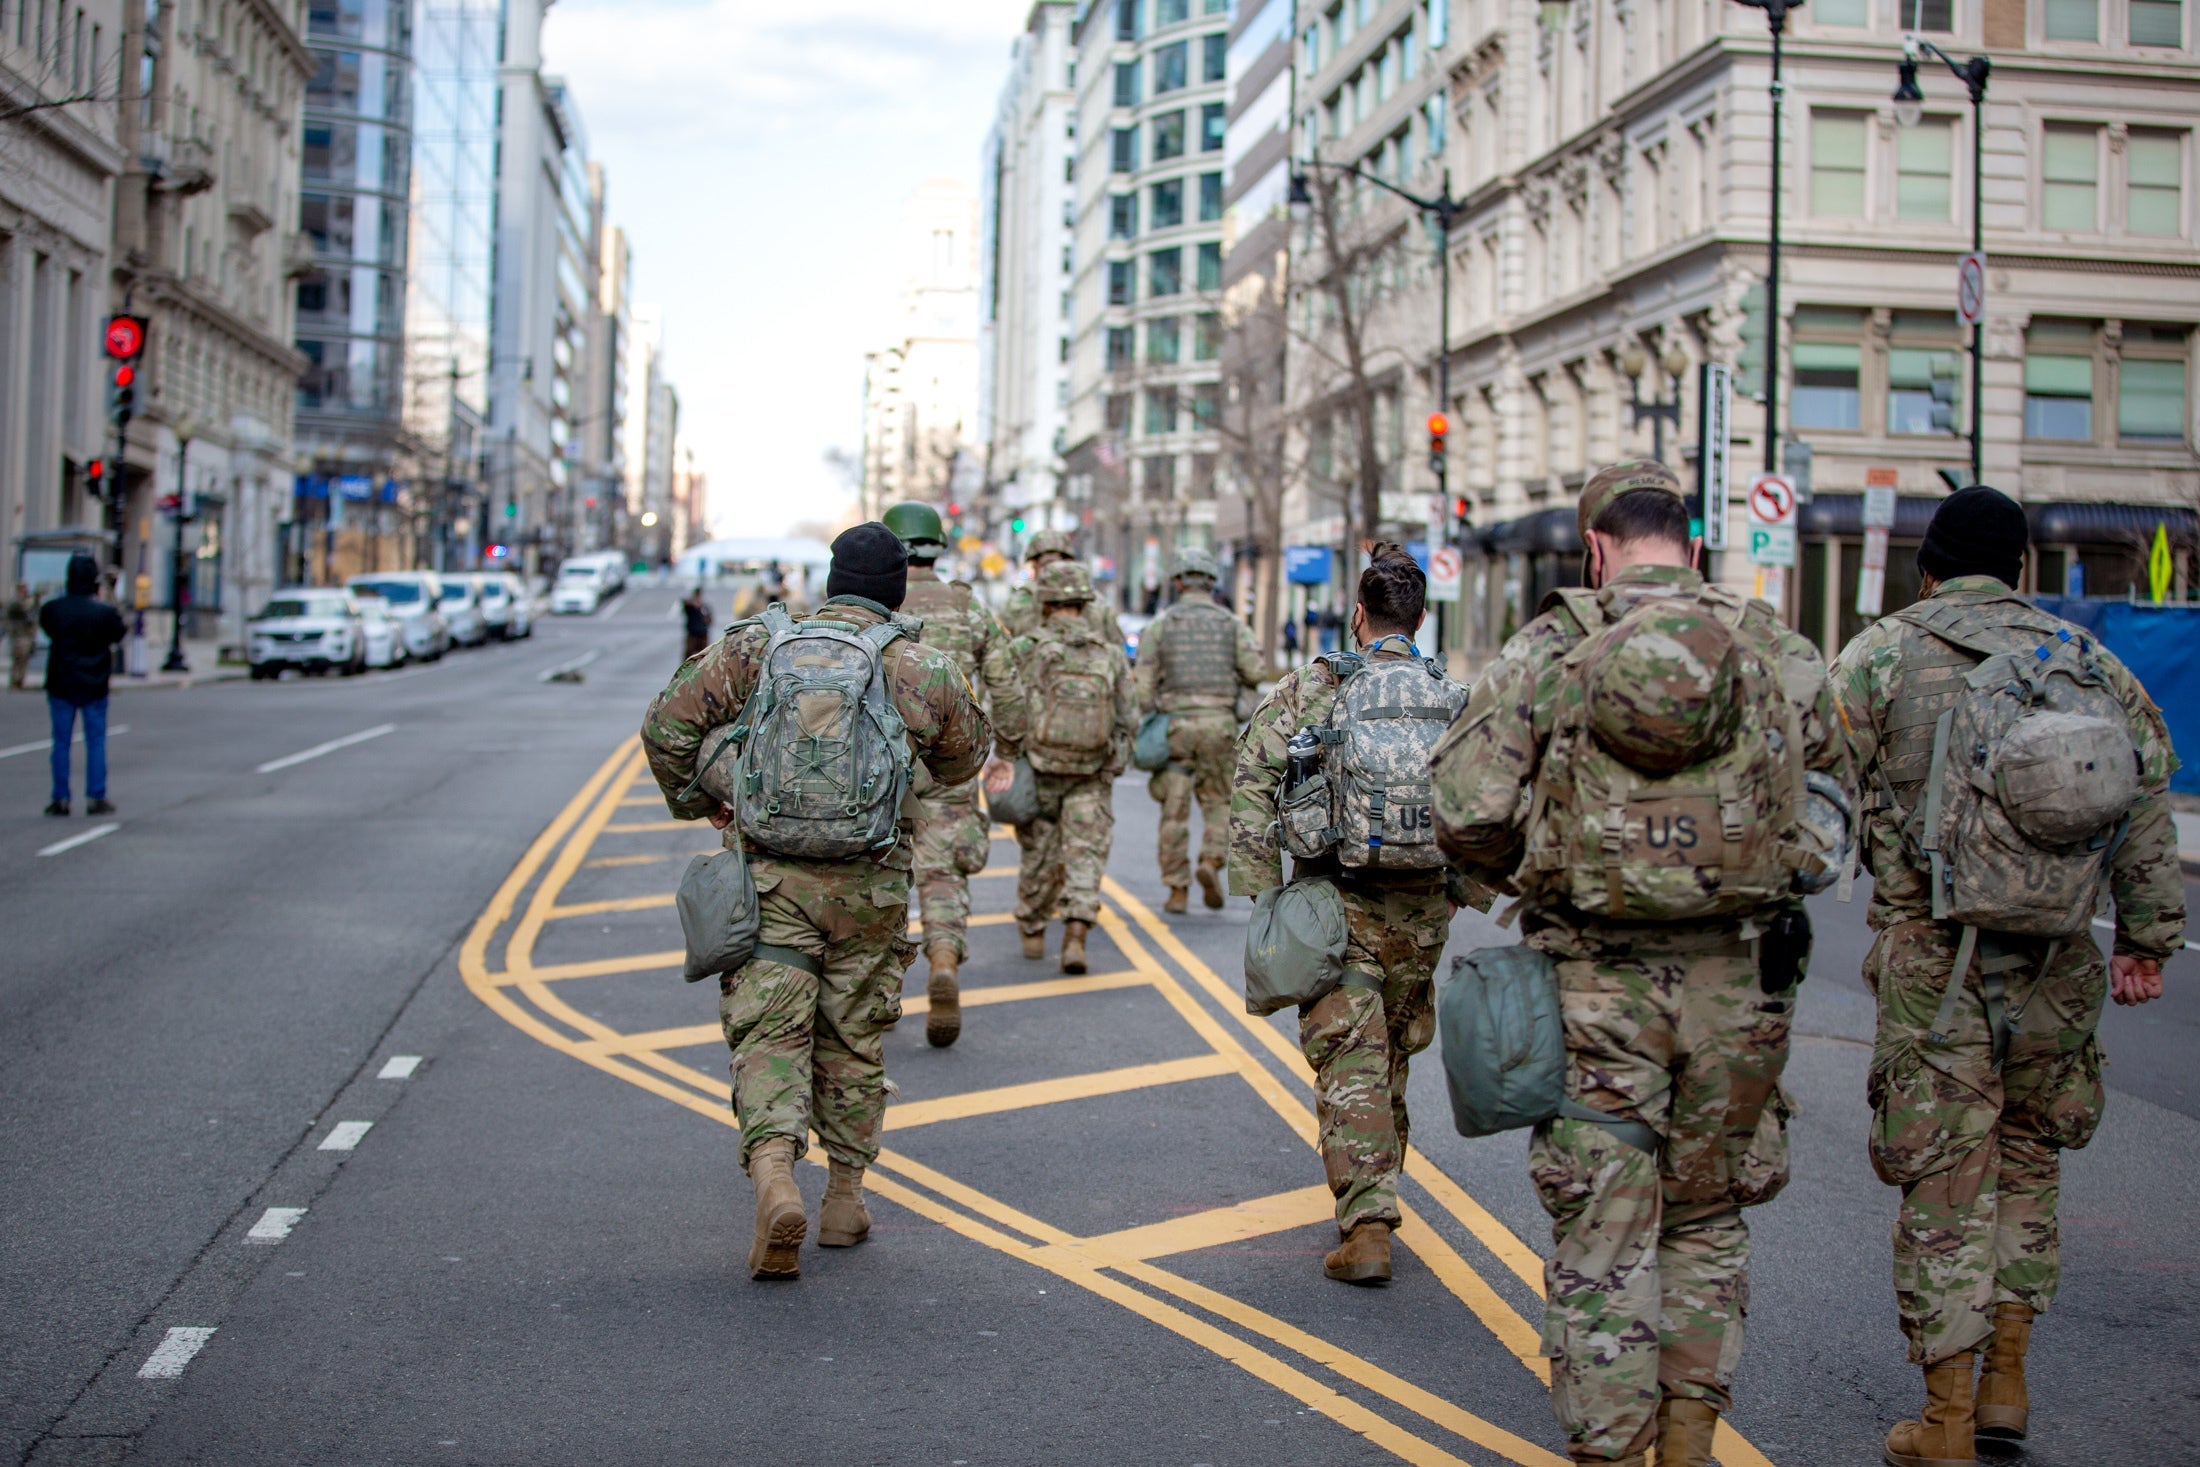 National Guard members in camo walk away from the camera in the middle of an empty street